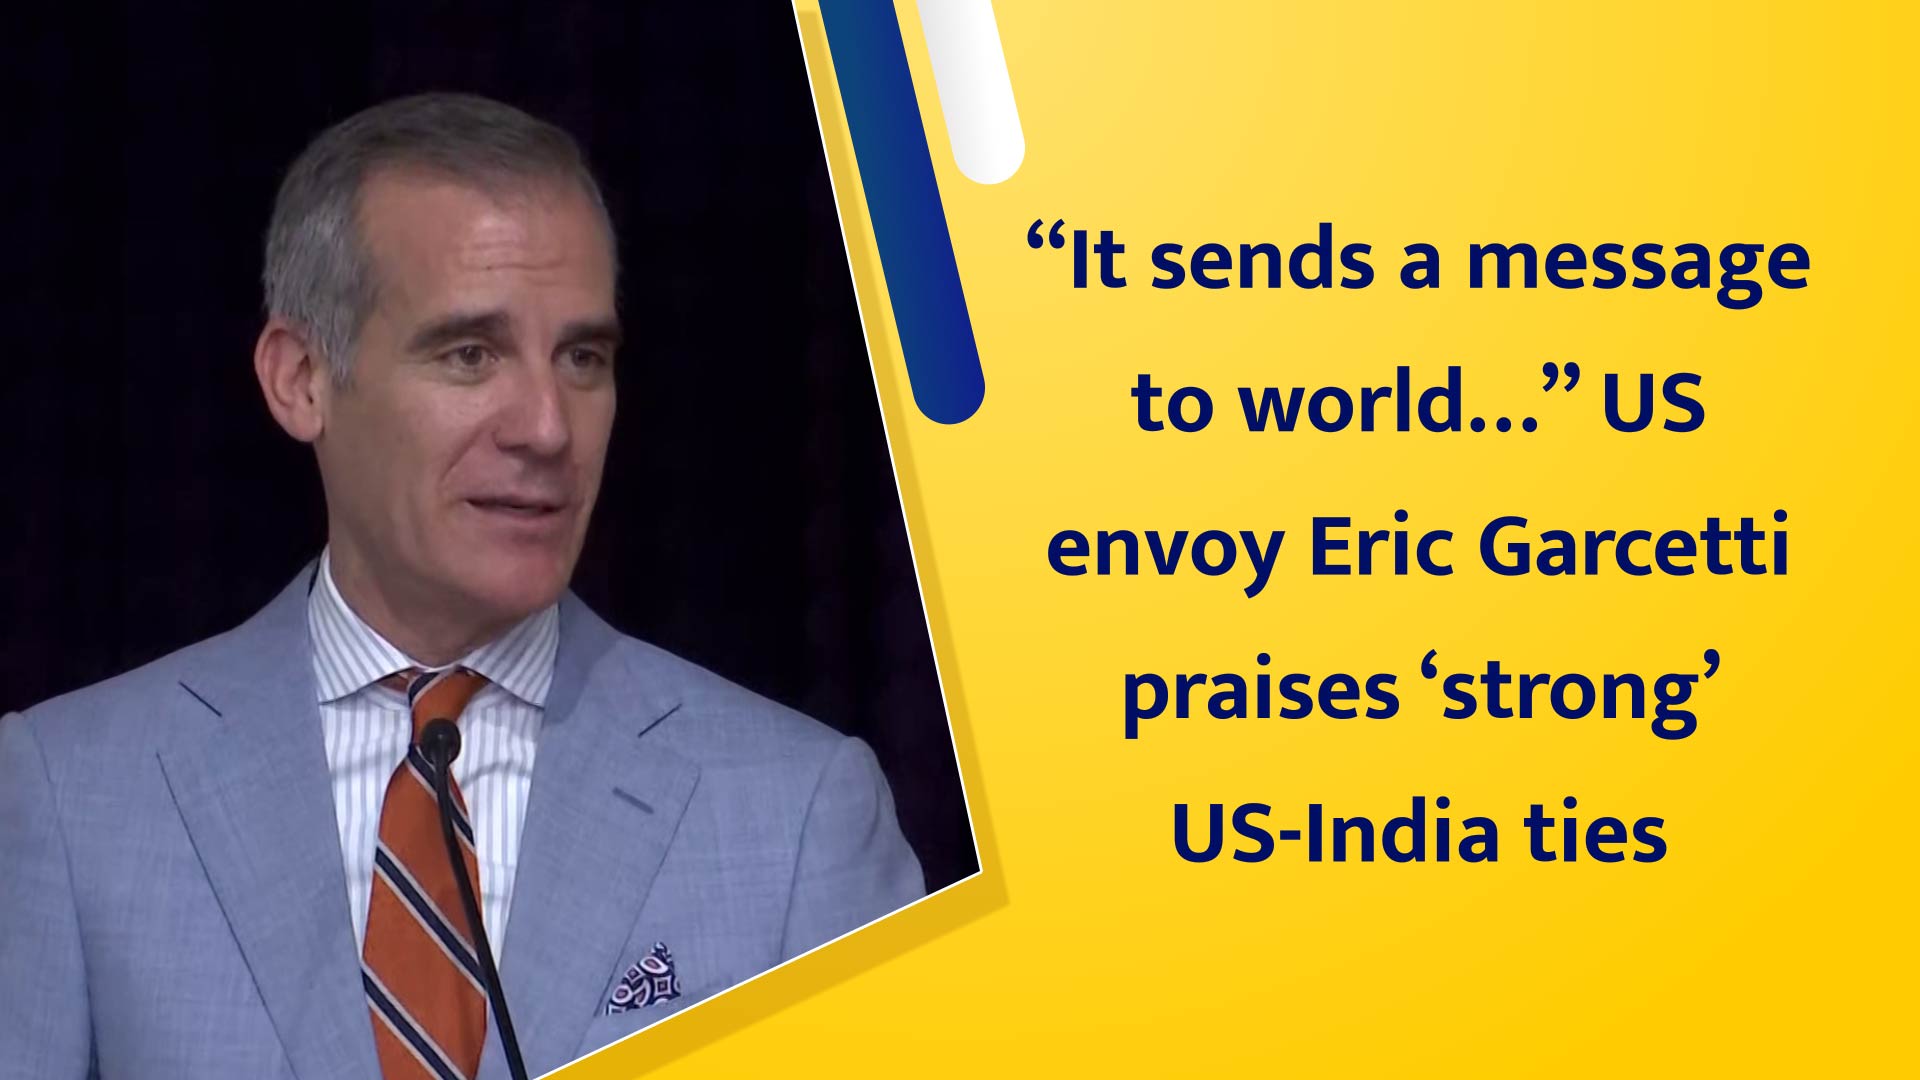 ``It sends a message to world`` US envoy Eric Garcetti praises `strong` US-India tie